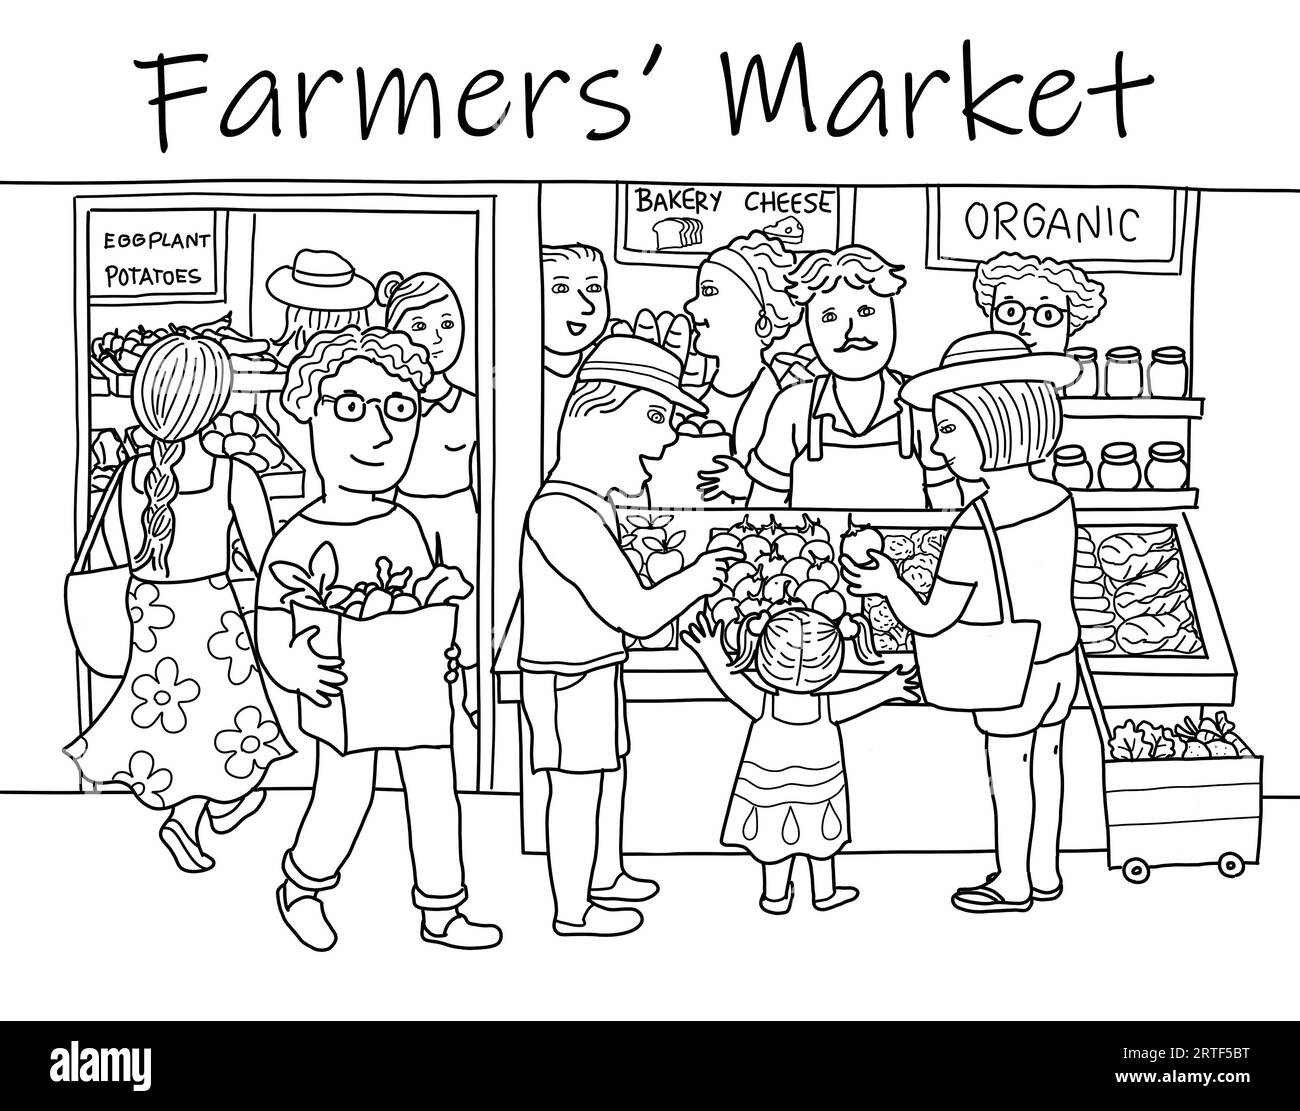 Farmers market. Group of multi-ethnic diverse people buying and selling healthy fresh fruits and vegetables at grocery store. Black and white. Stock Photo